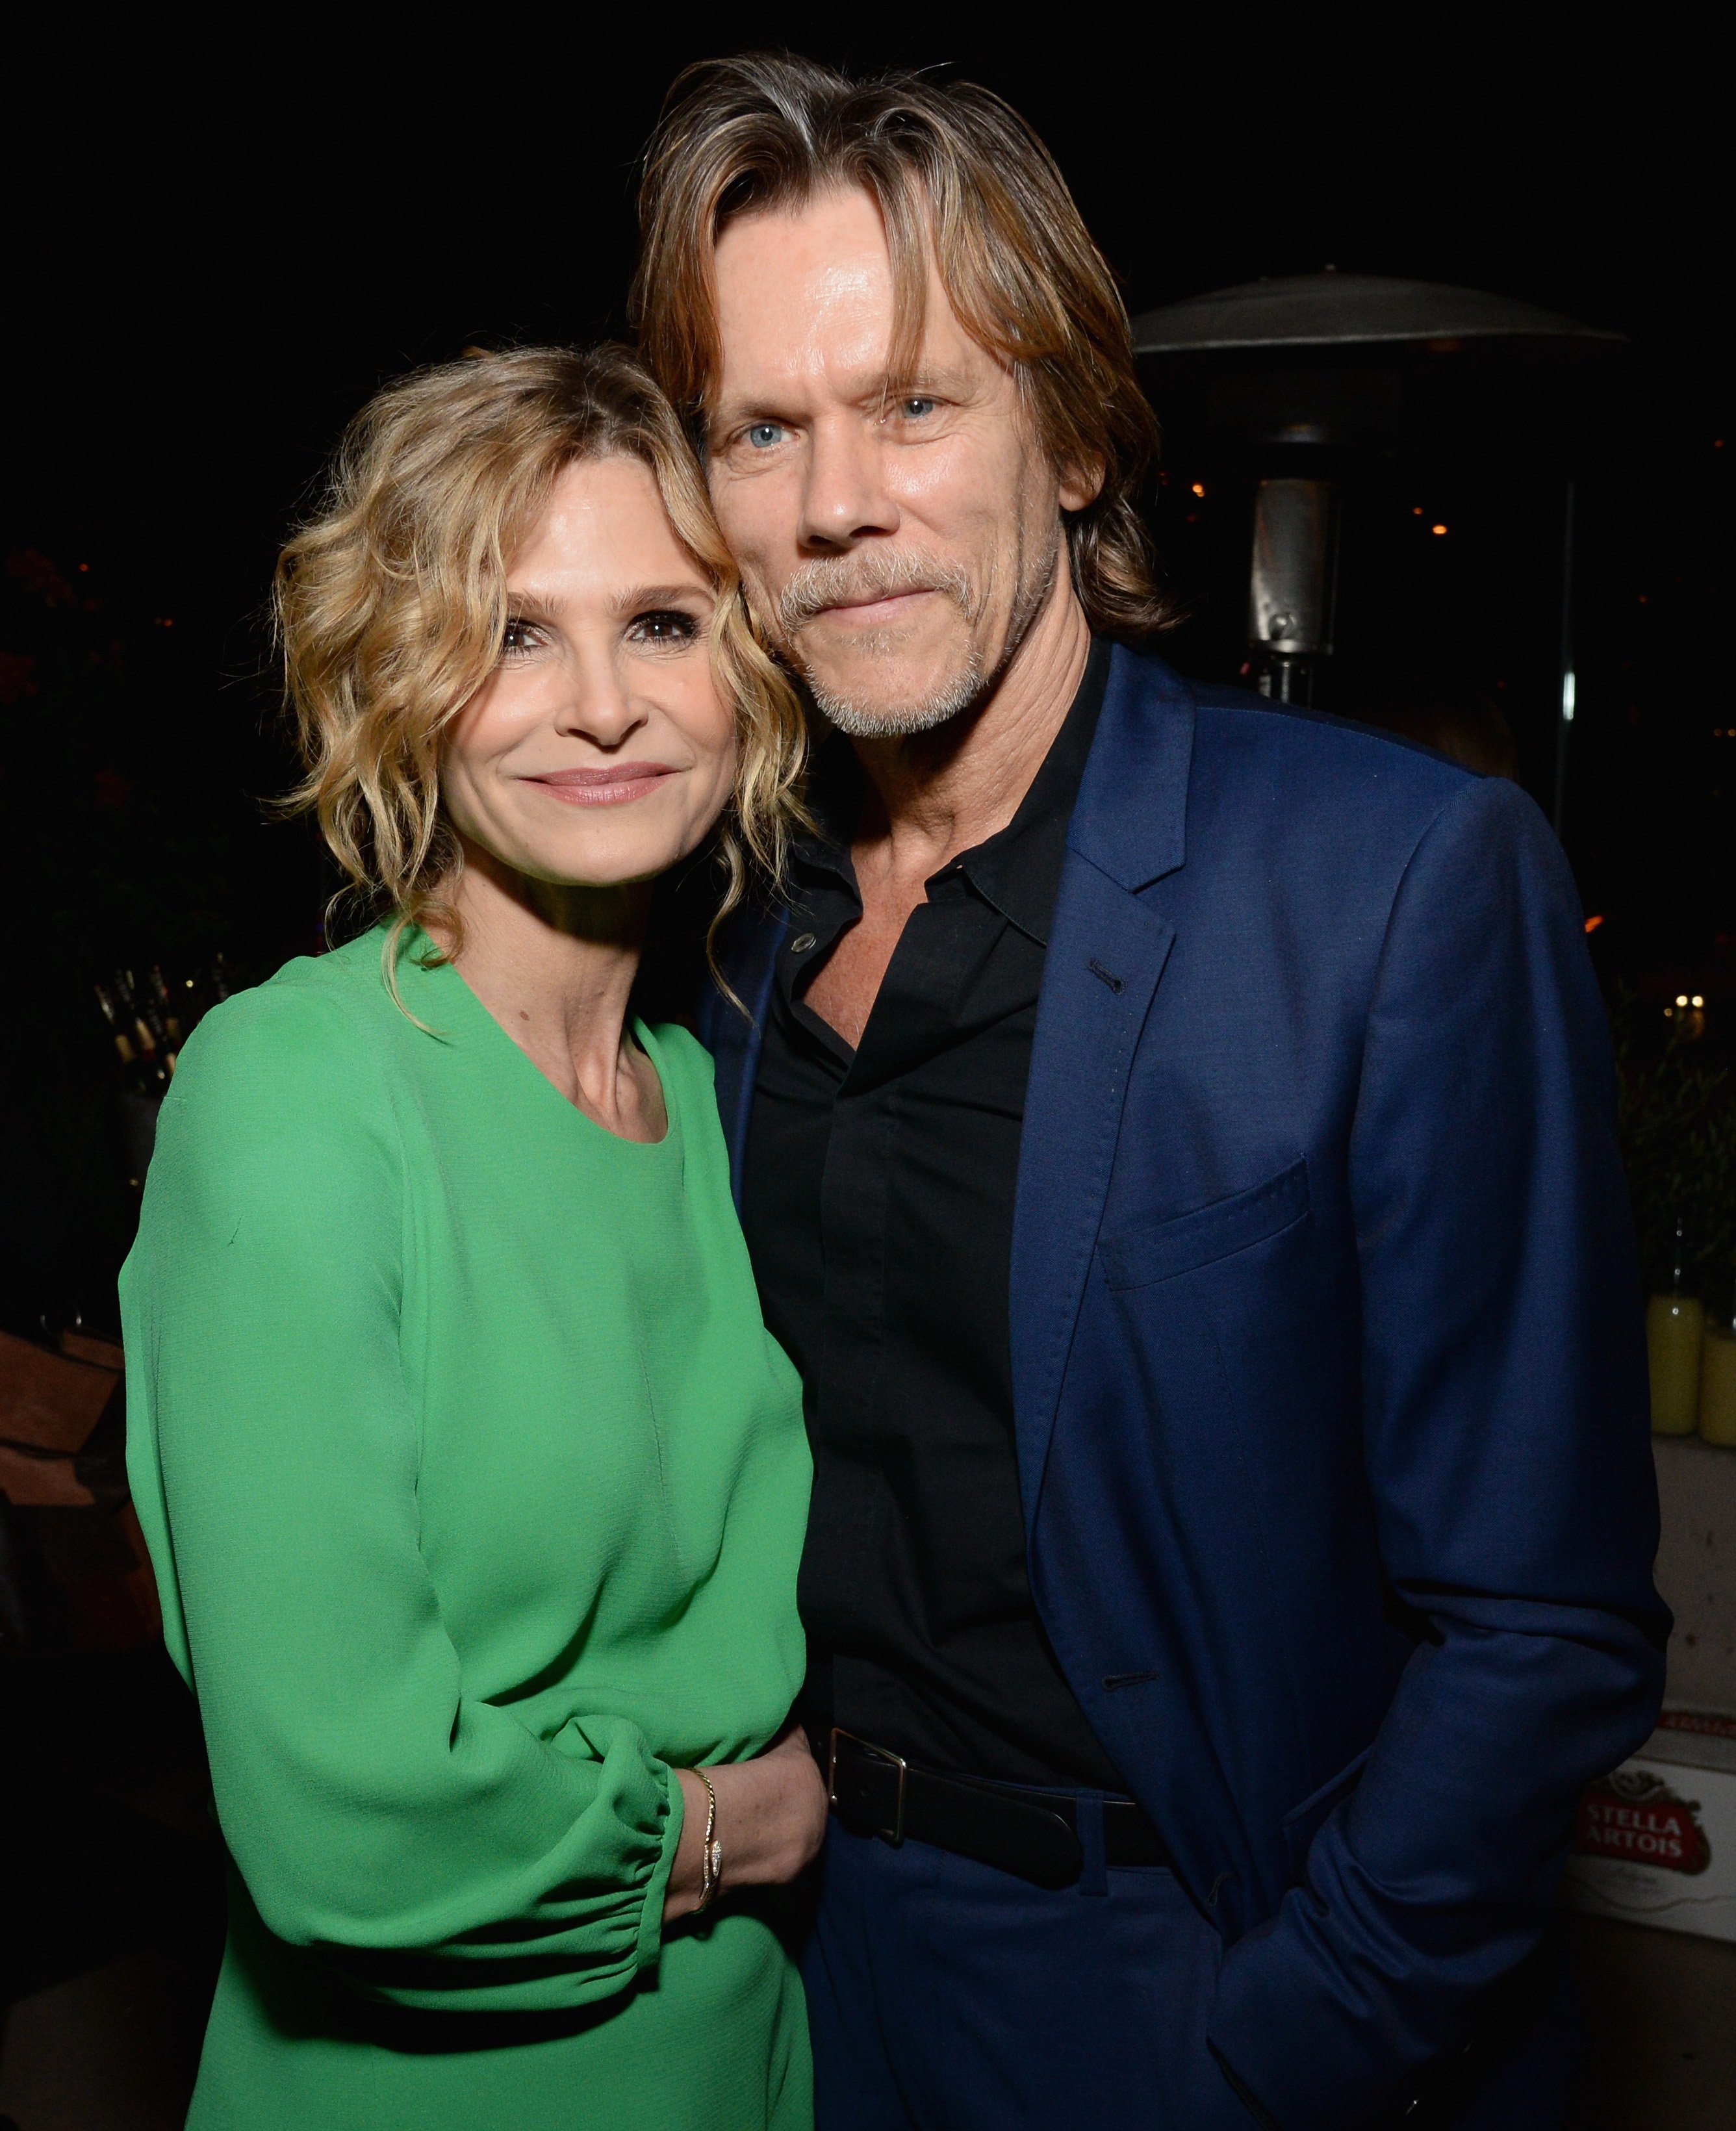 Kyra Sedgwick and Kevin Bacon attends the 75th Anniversary of The Golden Globe Award Season in West Hollywood, California on November 15, 2017 | Photo: Getty Images